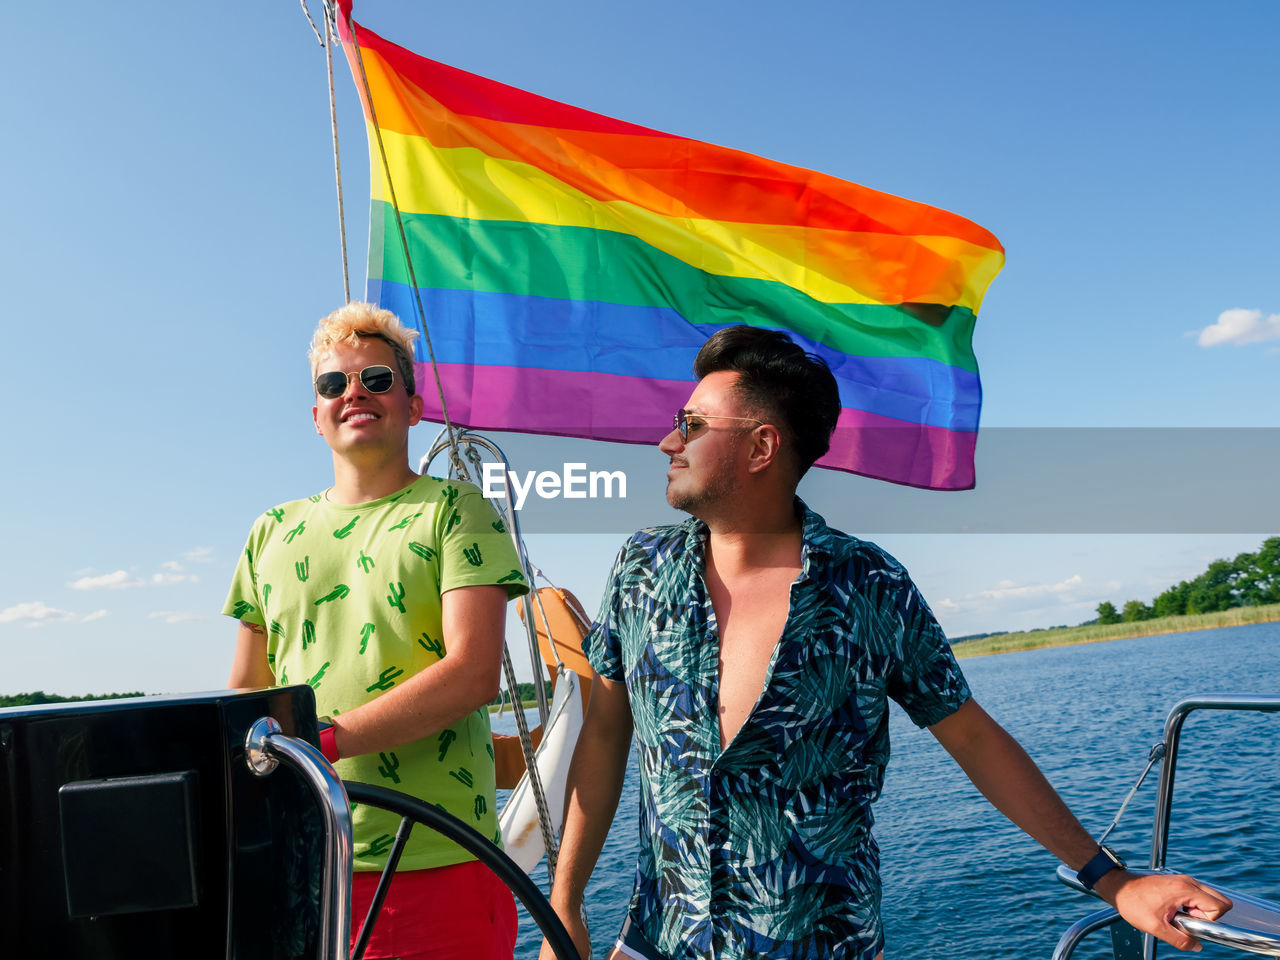 Gay couple have a vacations on a sailing yacht with lgbt rainbow flag